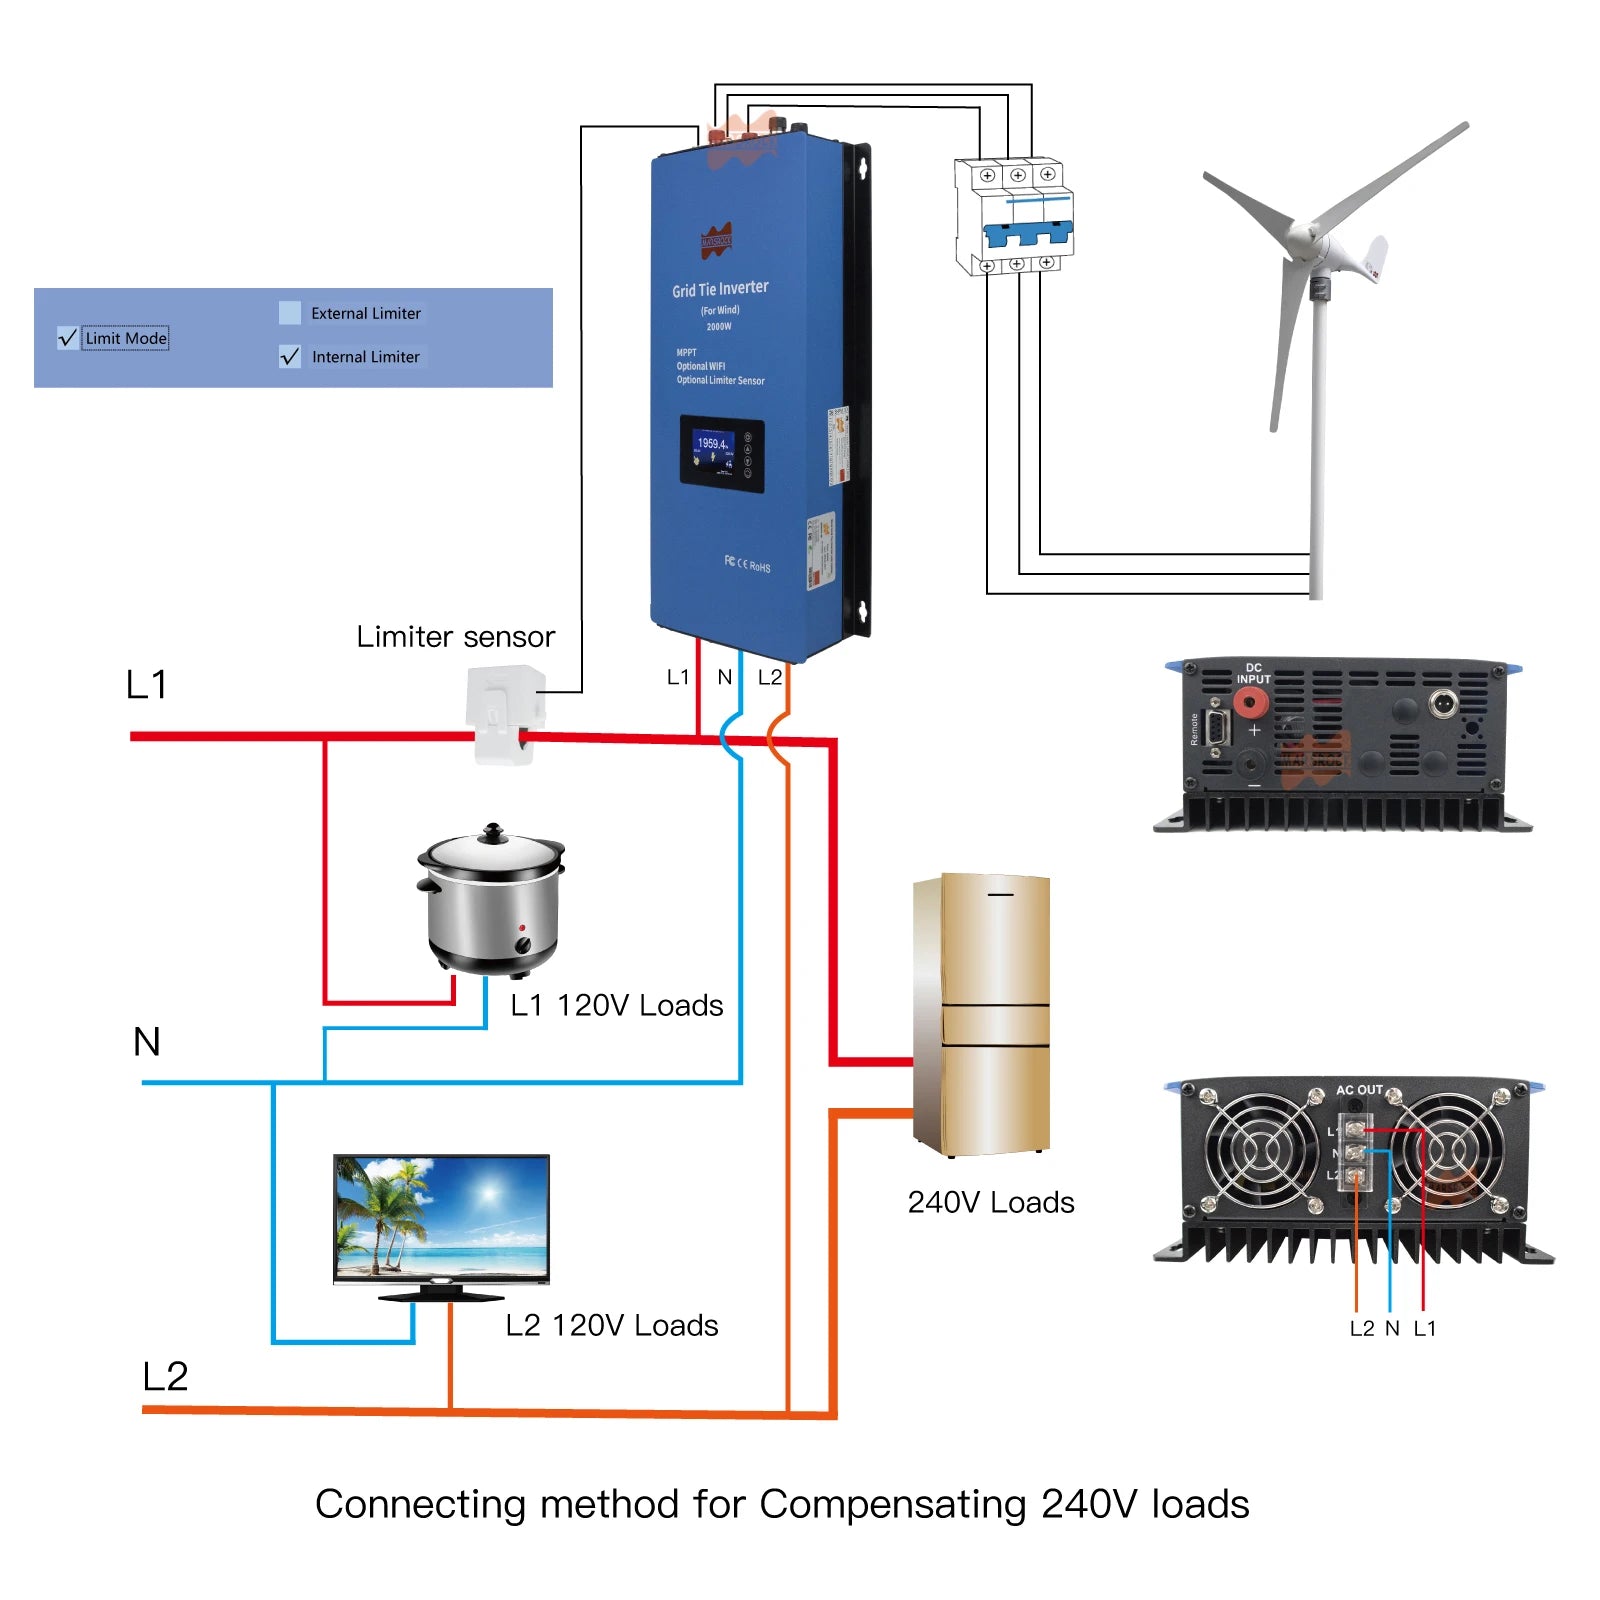 1000W 2000W Solar Inverter, Grid-tie inverter with external and internal limiters for stable performance, compatible with L1/L2 sources and loads.